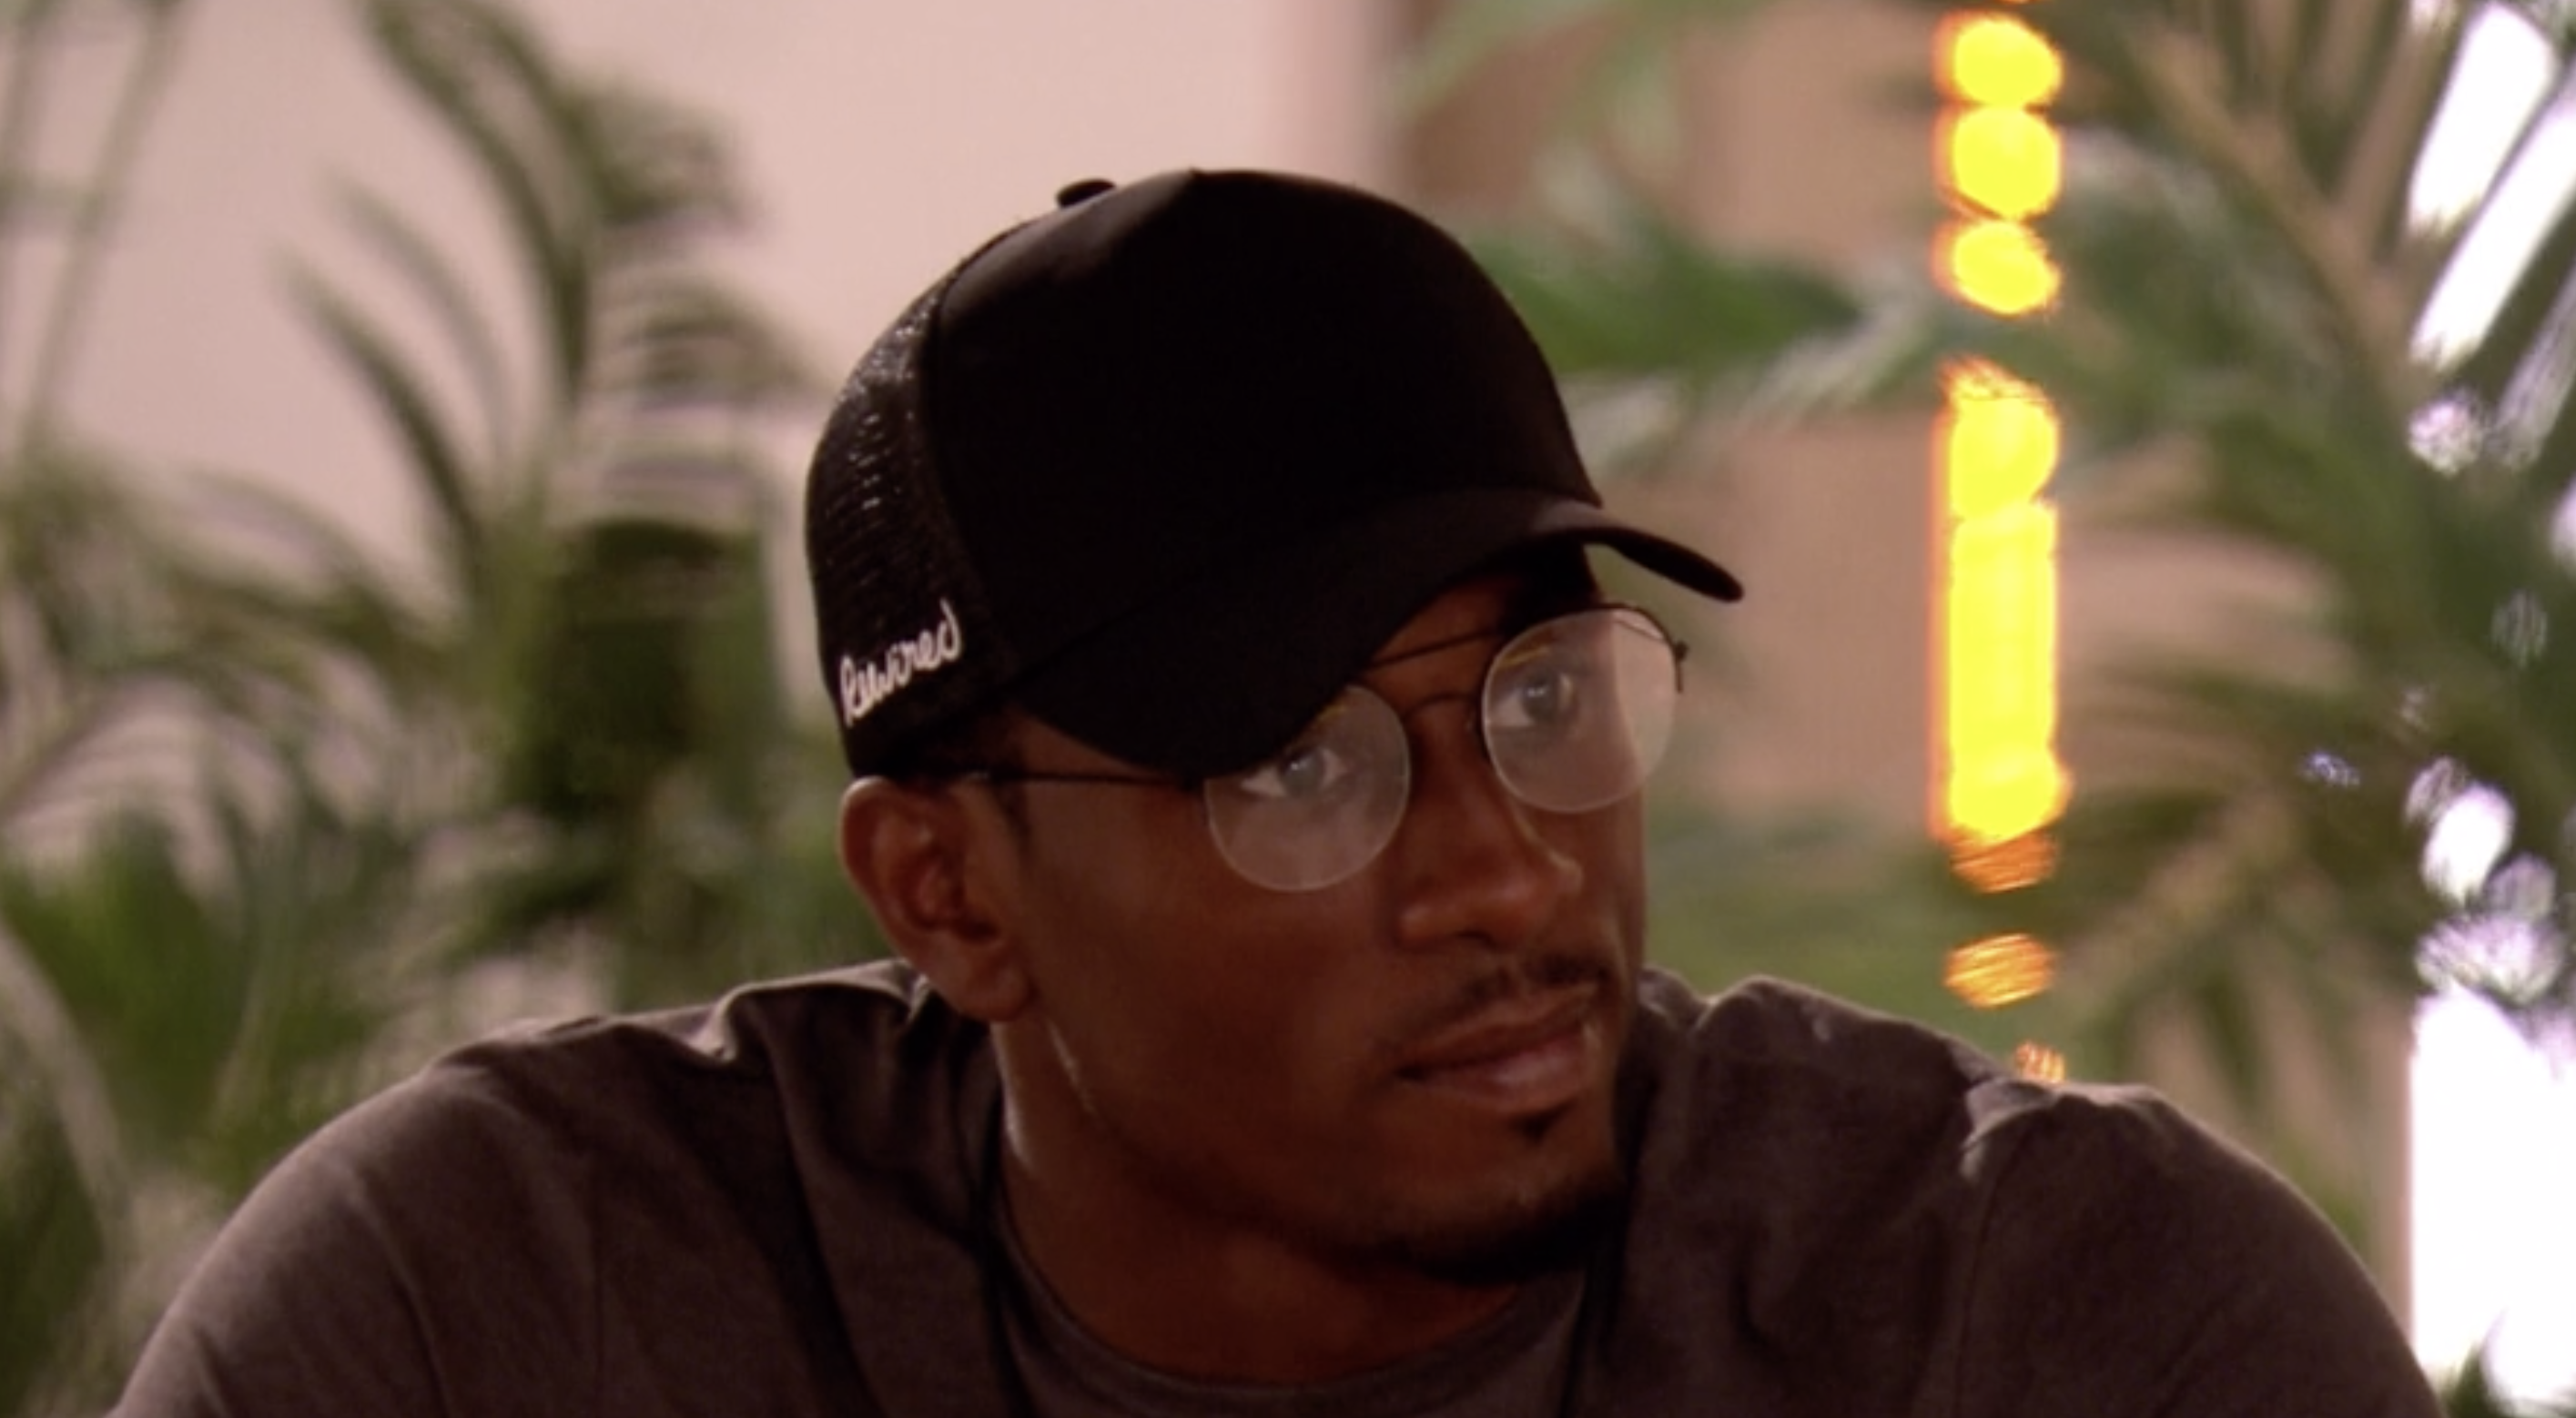 Love Island: Ovie opening up on his net worth proves he is super genuine